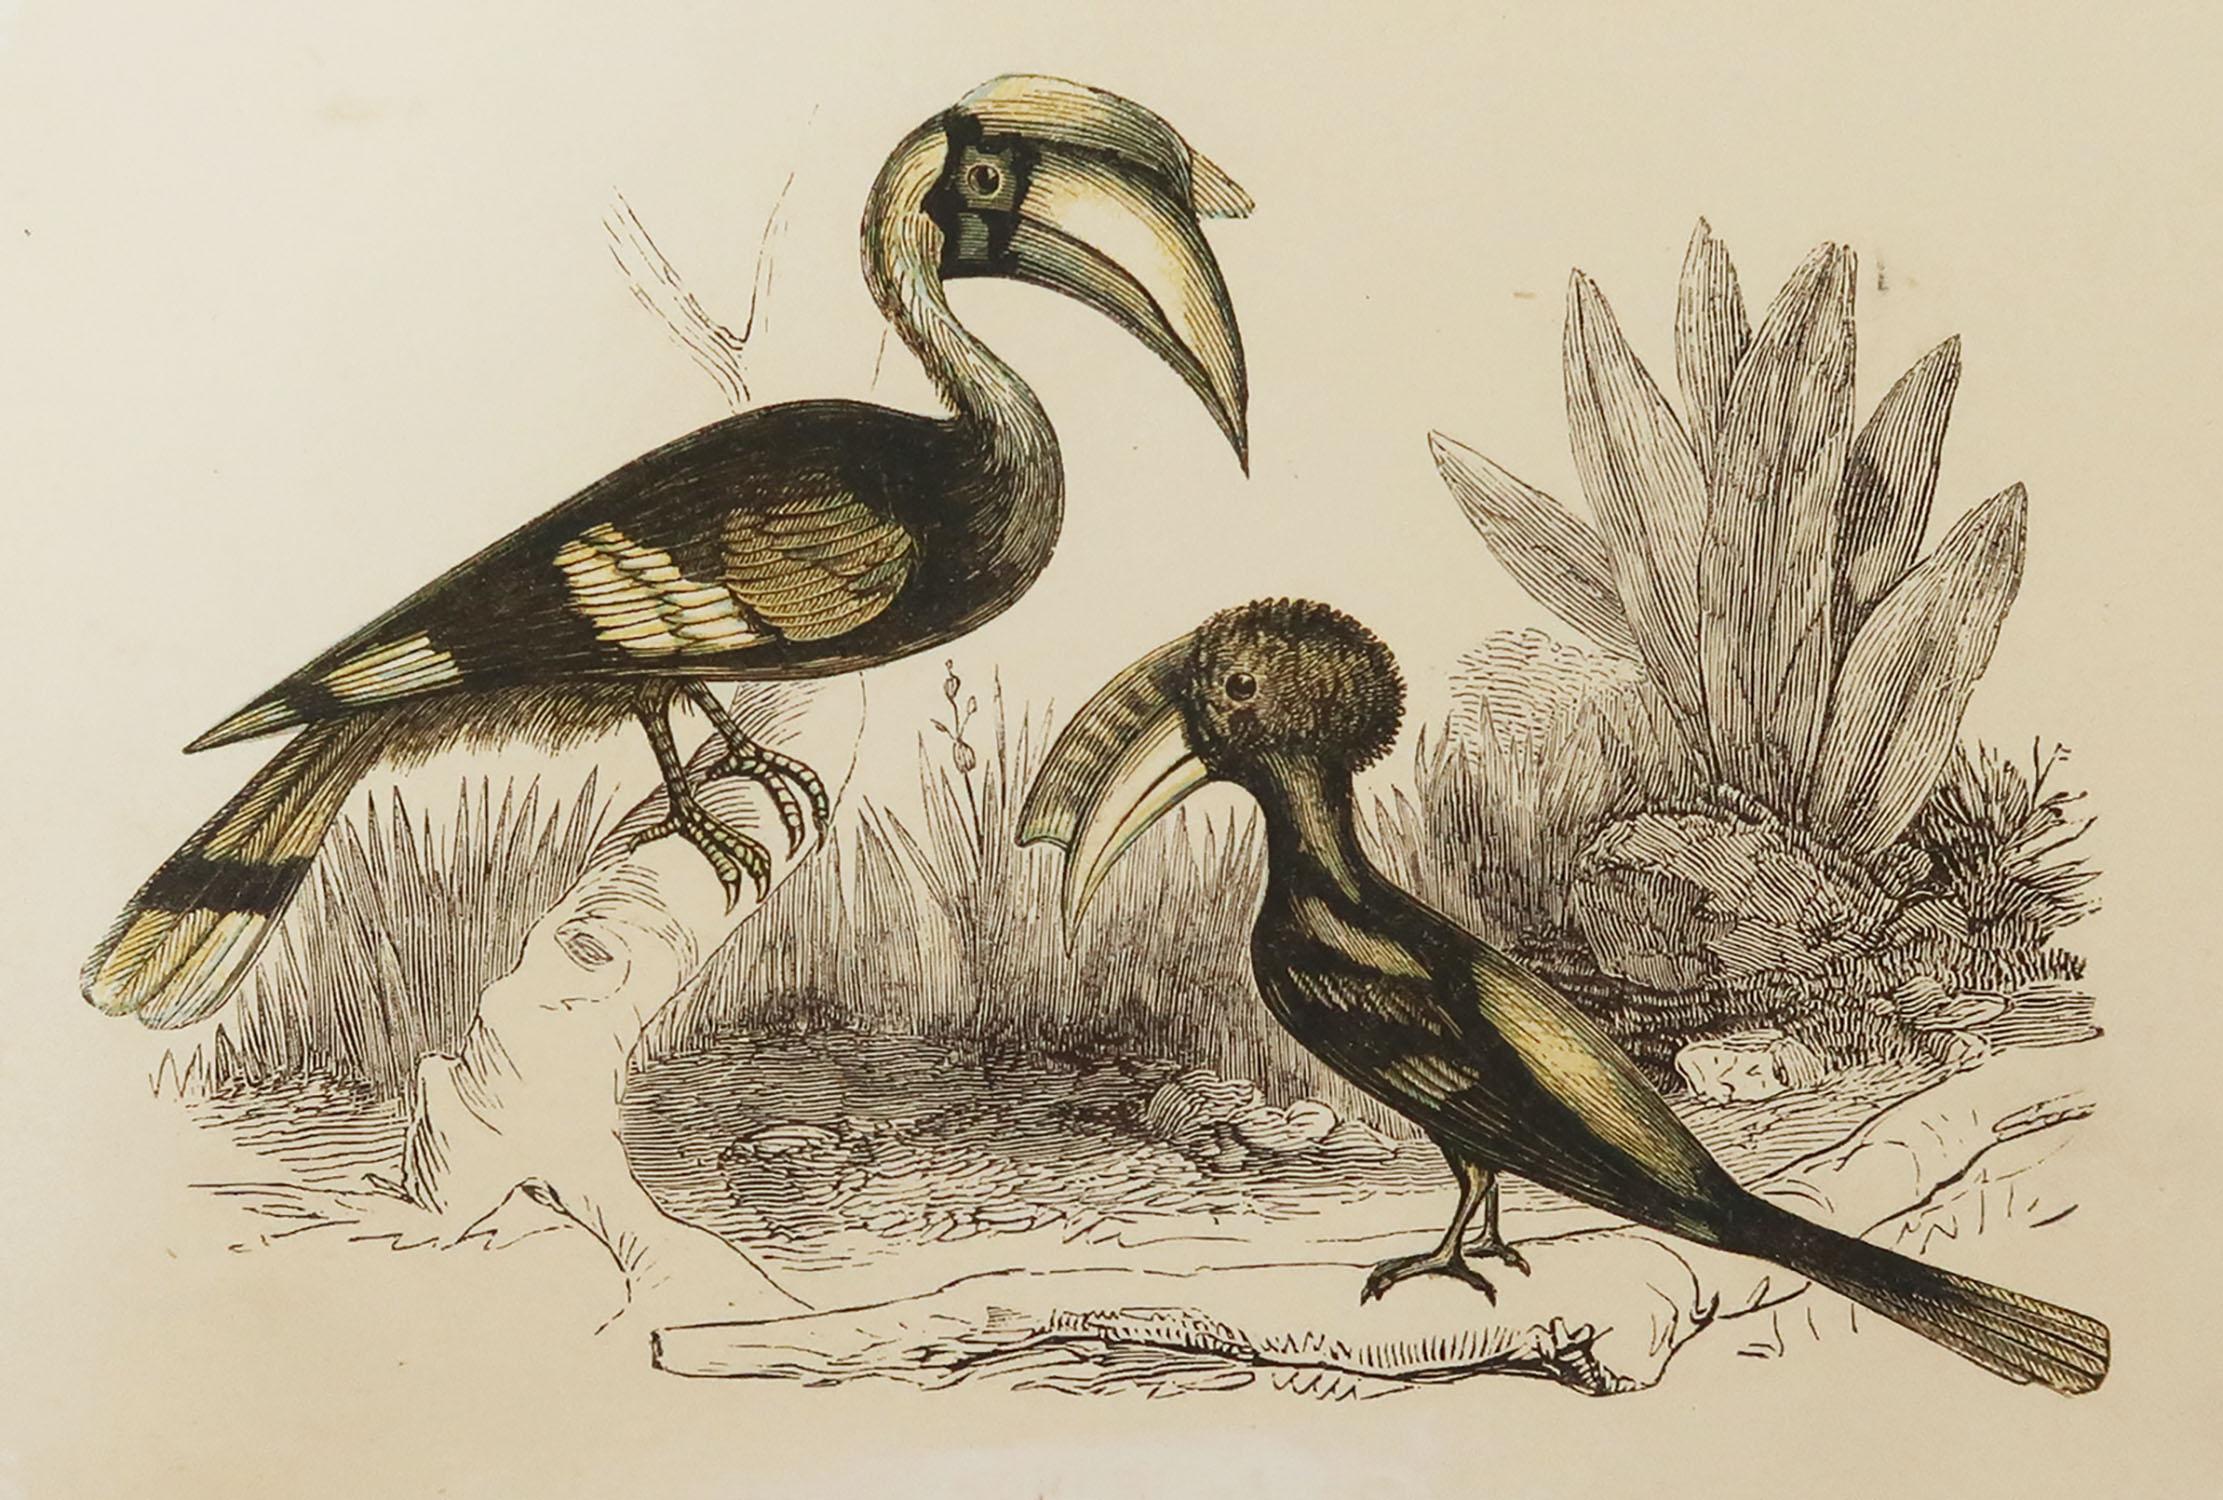 Great image of hornbills

Unframed. It gives you the option of perhaps making a set up using your own choice of frames.

Lithograph with original color.

Published by Tallis, circa 1850

Crudely inscribed title has been erased at the bottom